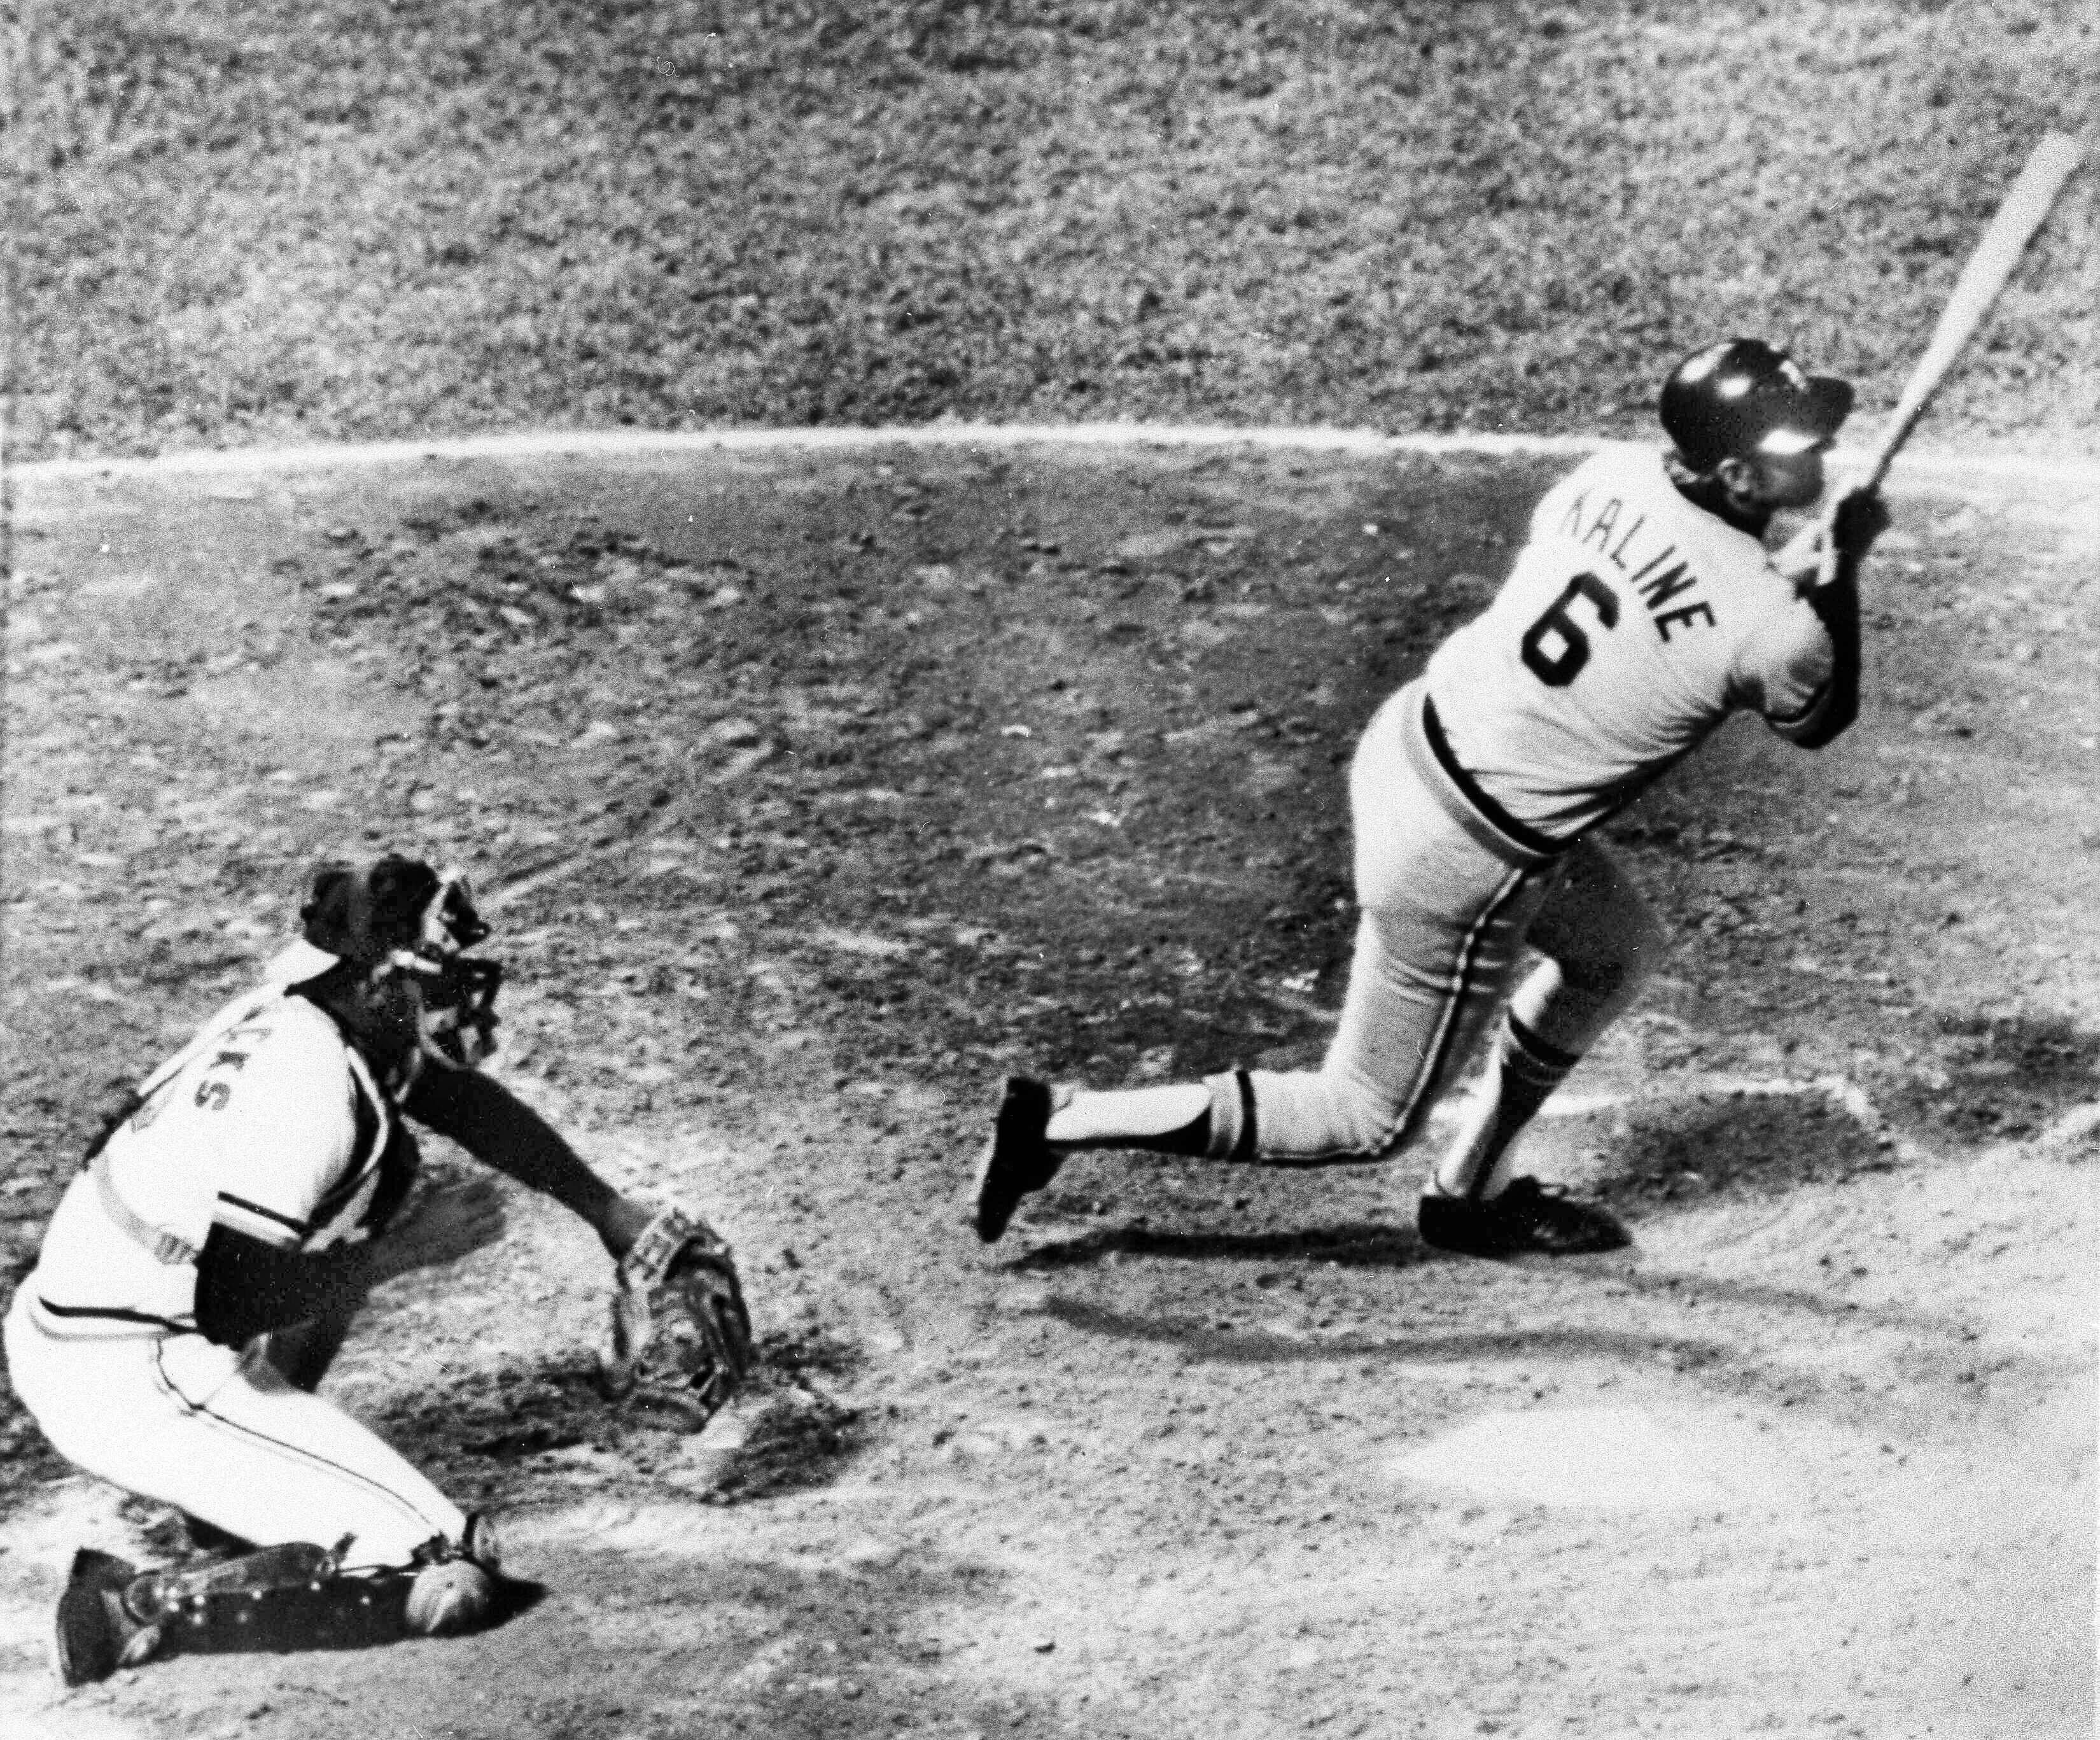 Al Kaline of the Detroit Tigers hits his 3,000th hit of his career, Sept 25, 1974, in Baltimore. The hit came off Orioles Dave McNally and enabled Kaline to become the 12 player in major league baseball history to reach the 3,000-hit plateau. Baltimore catcher is Andy Etchebarren.